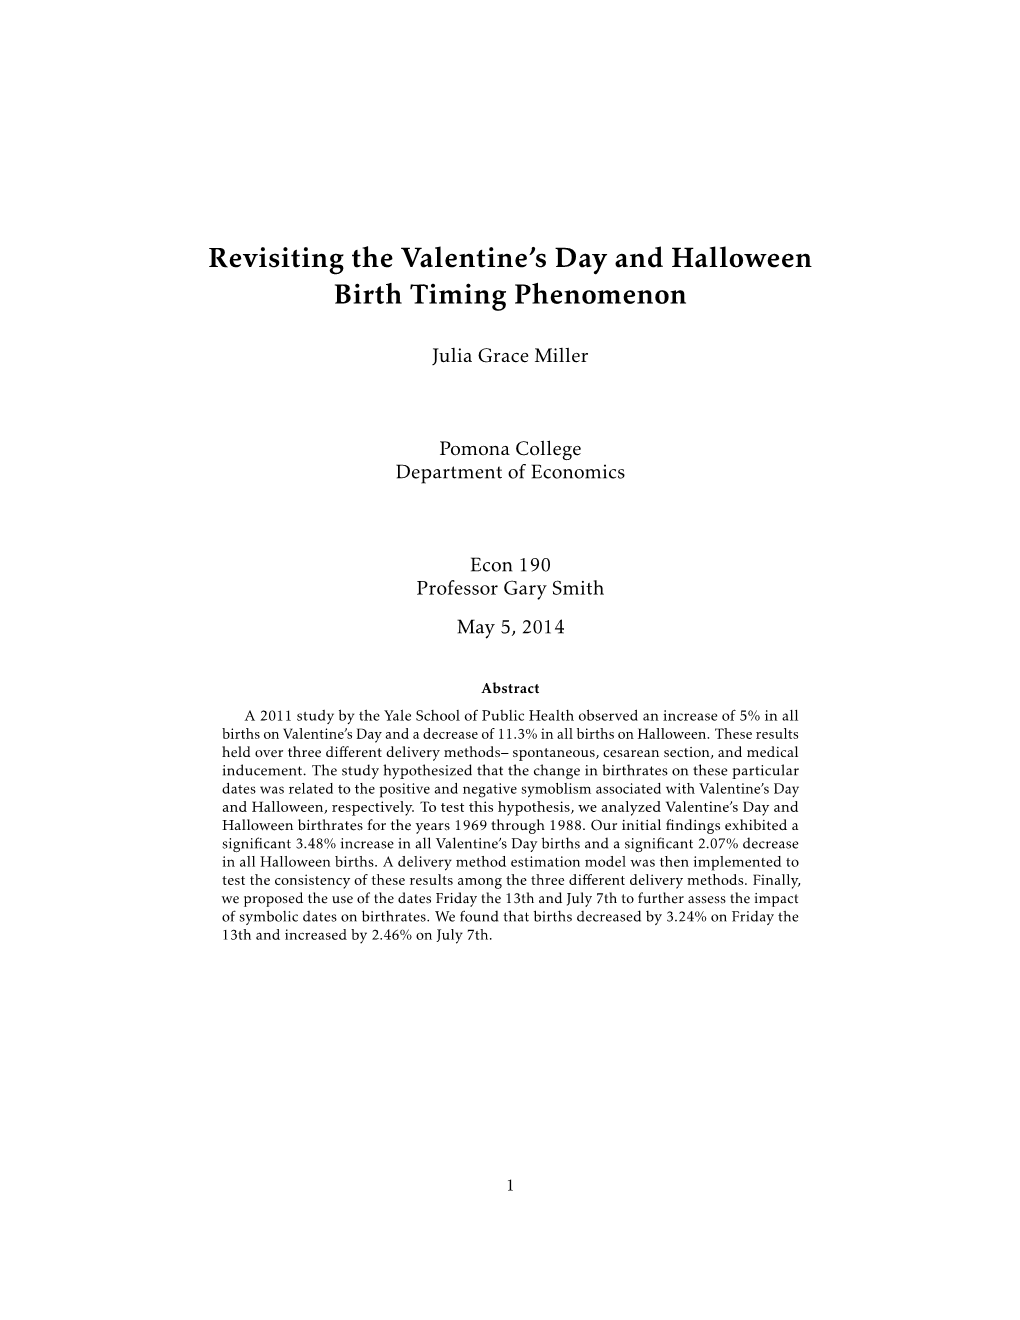 Revisiting the Valentine's Day and Halloween Birth Timing Phenomenon